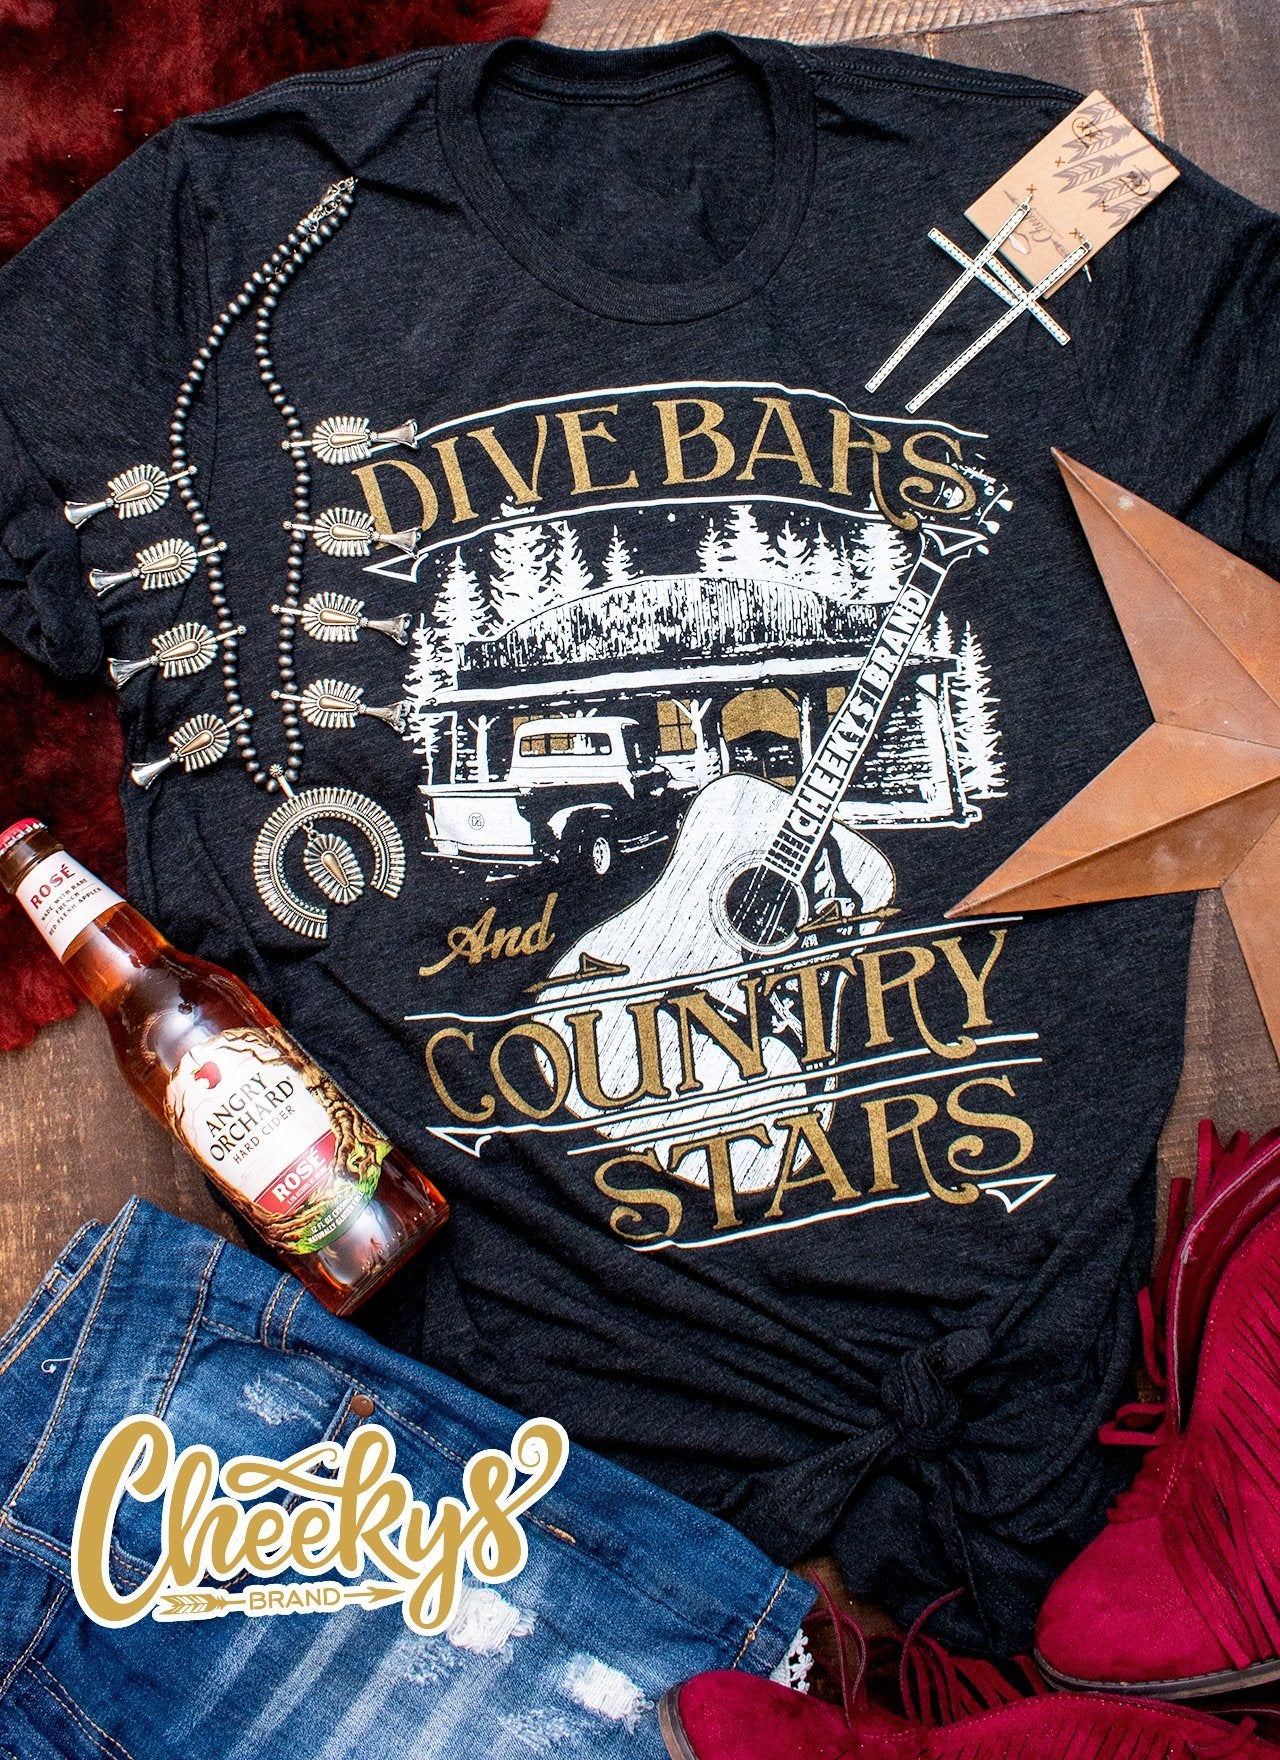 Dive Bars and Country Stars on Vintage Black Unisex Cheekys Apparel 38 